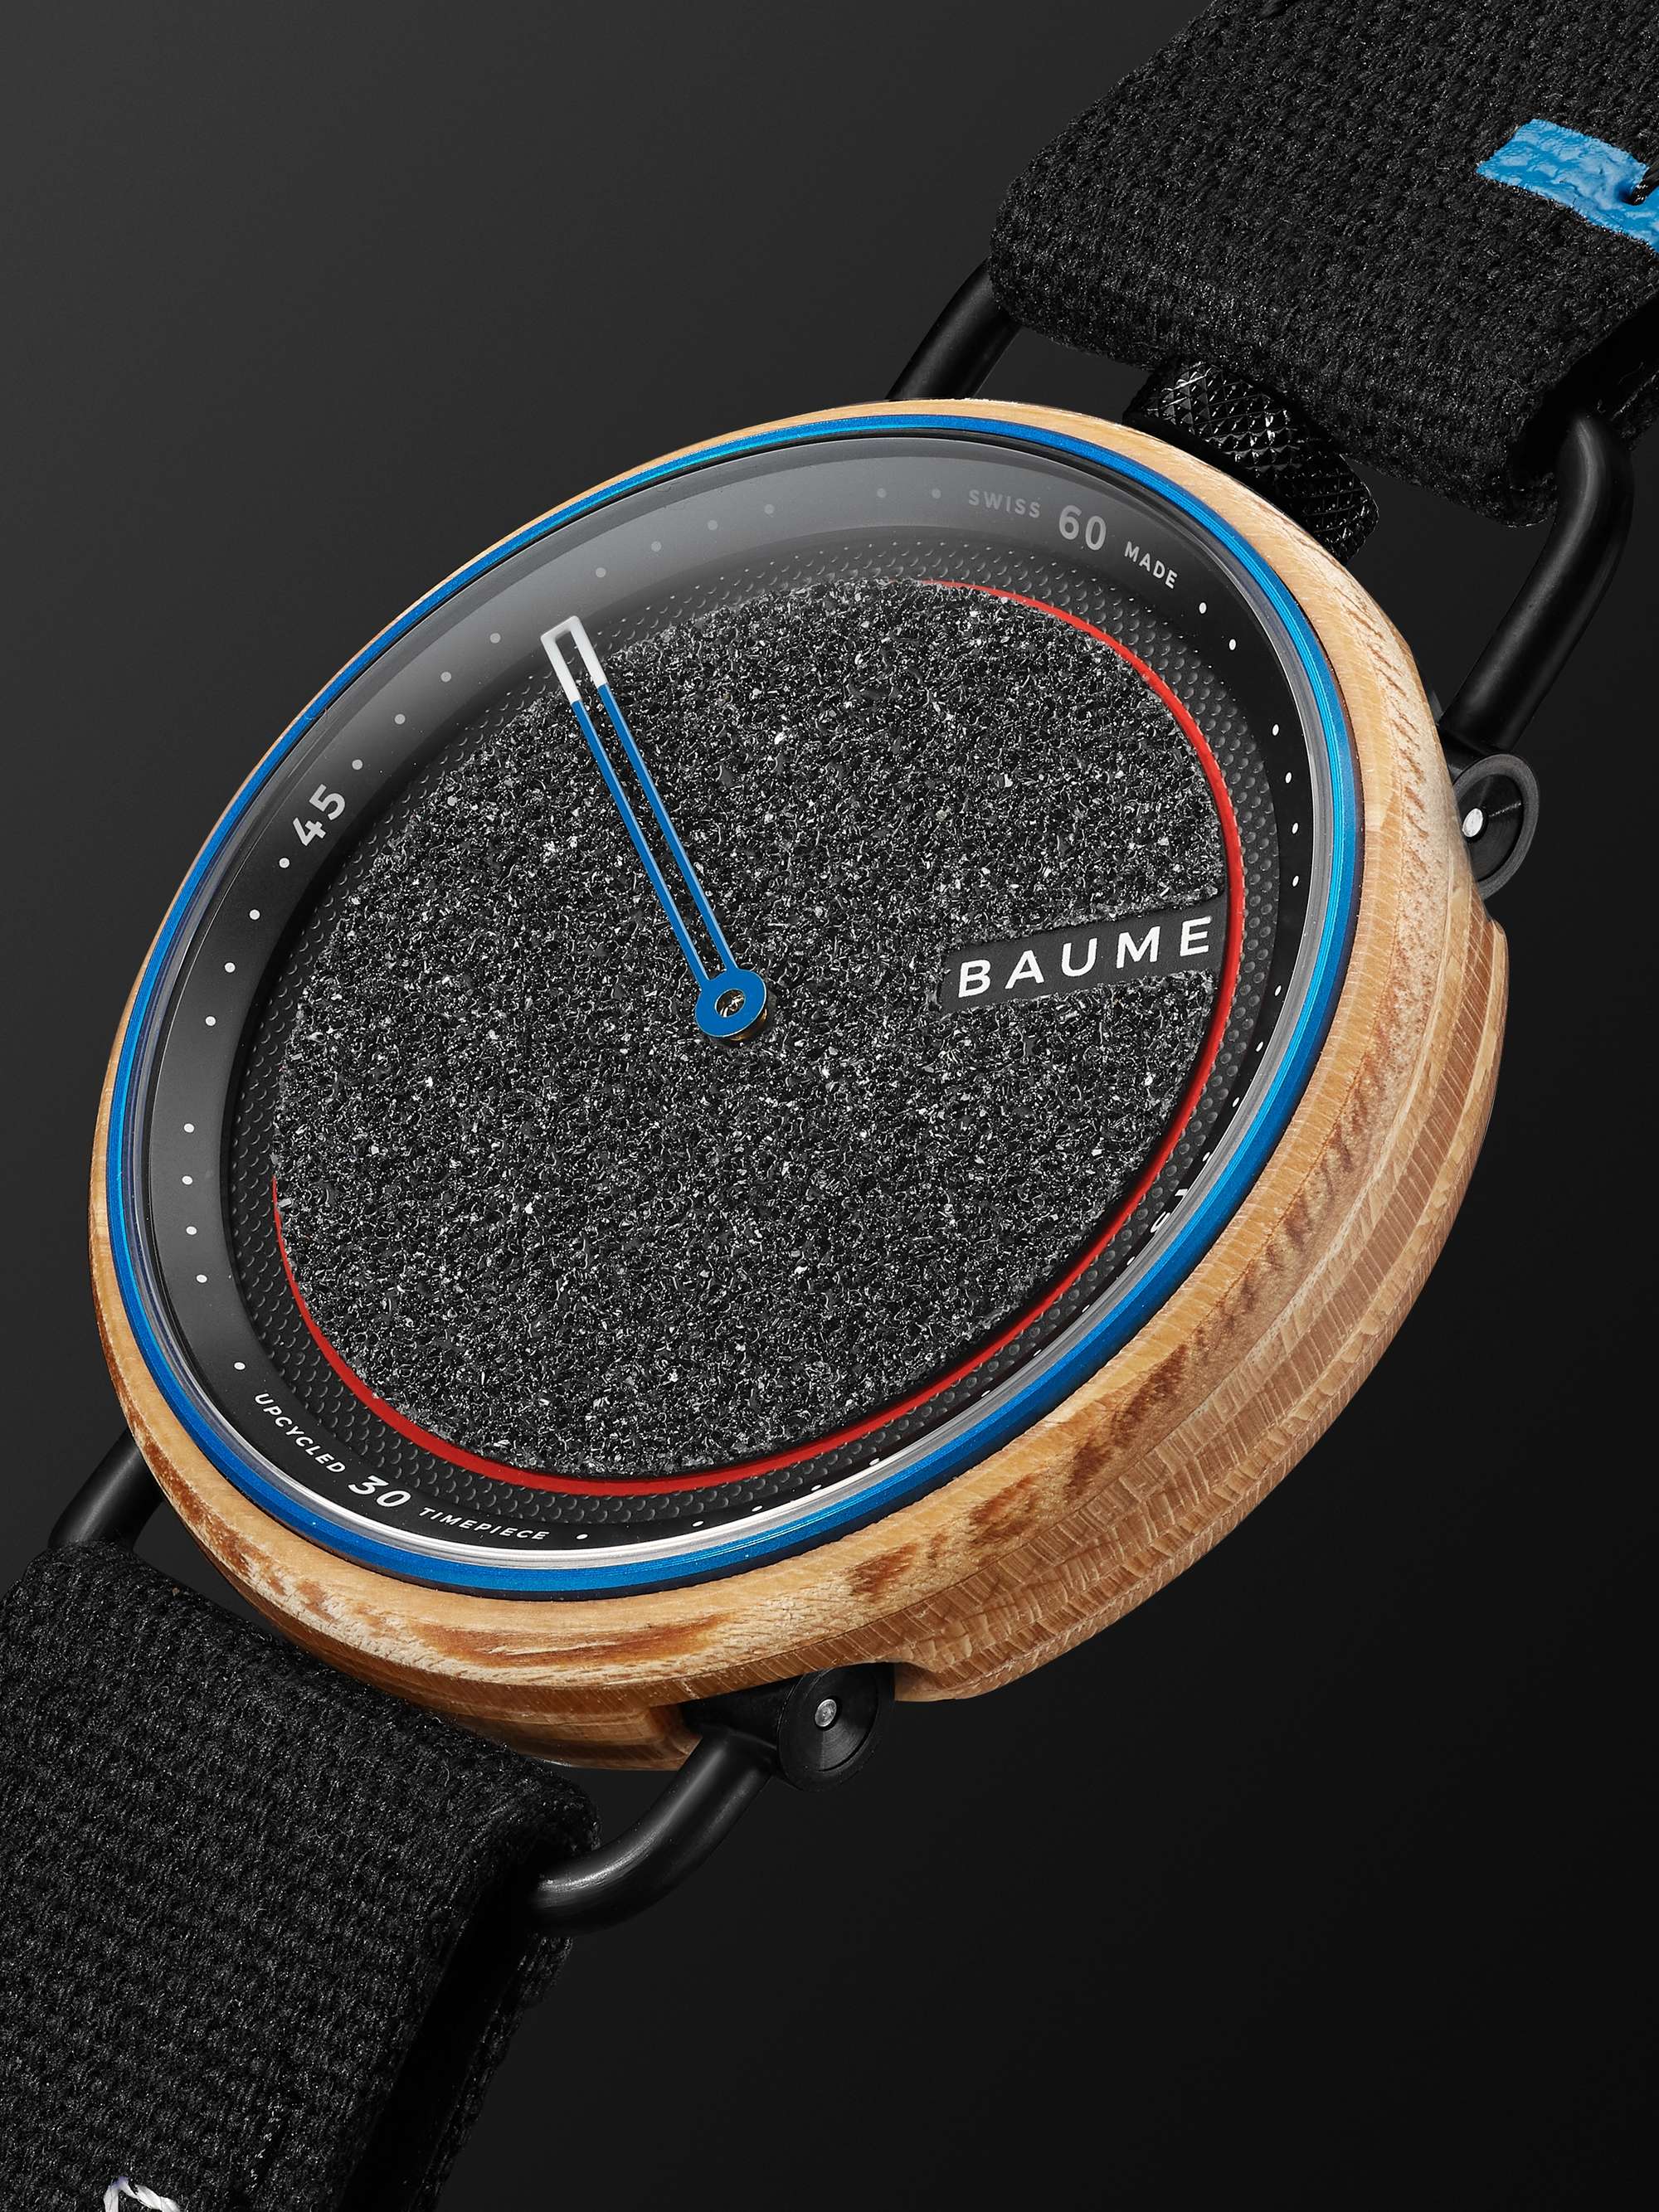 BAUME Baume Skate Automatic 42.4mm Aluminium, Wood and Webbing Watch, Ref. No. M0A10653